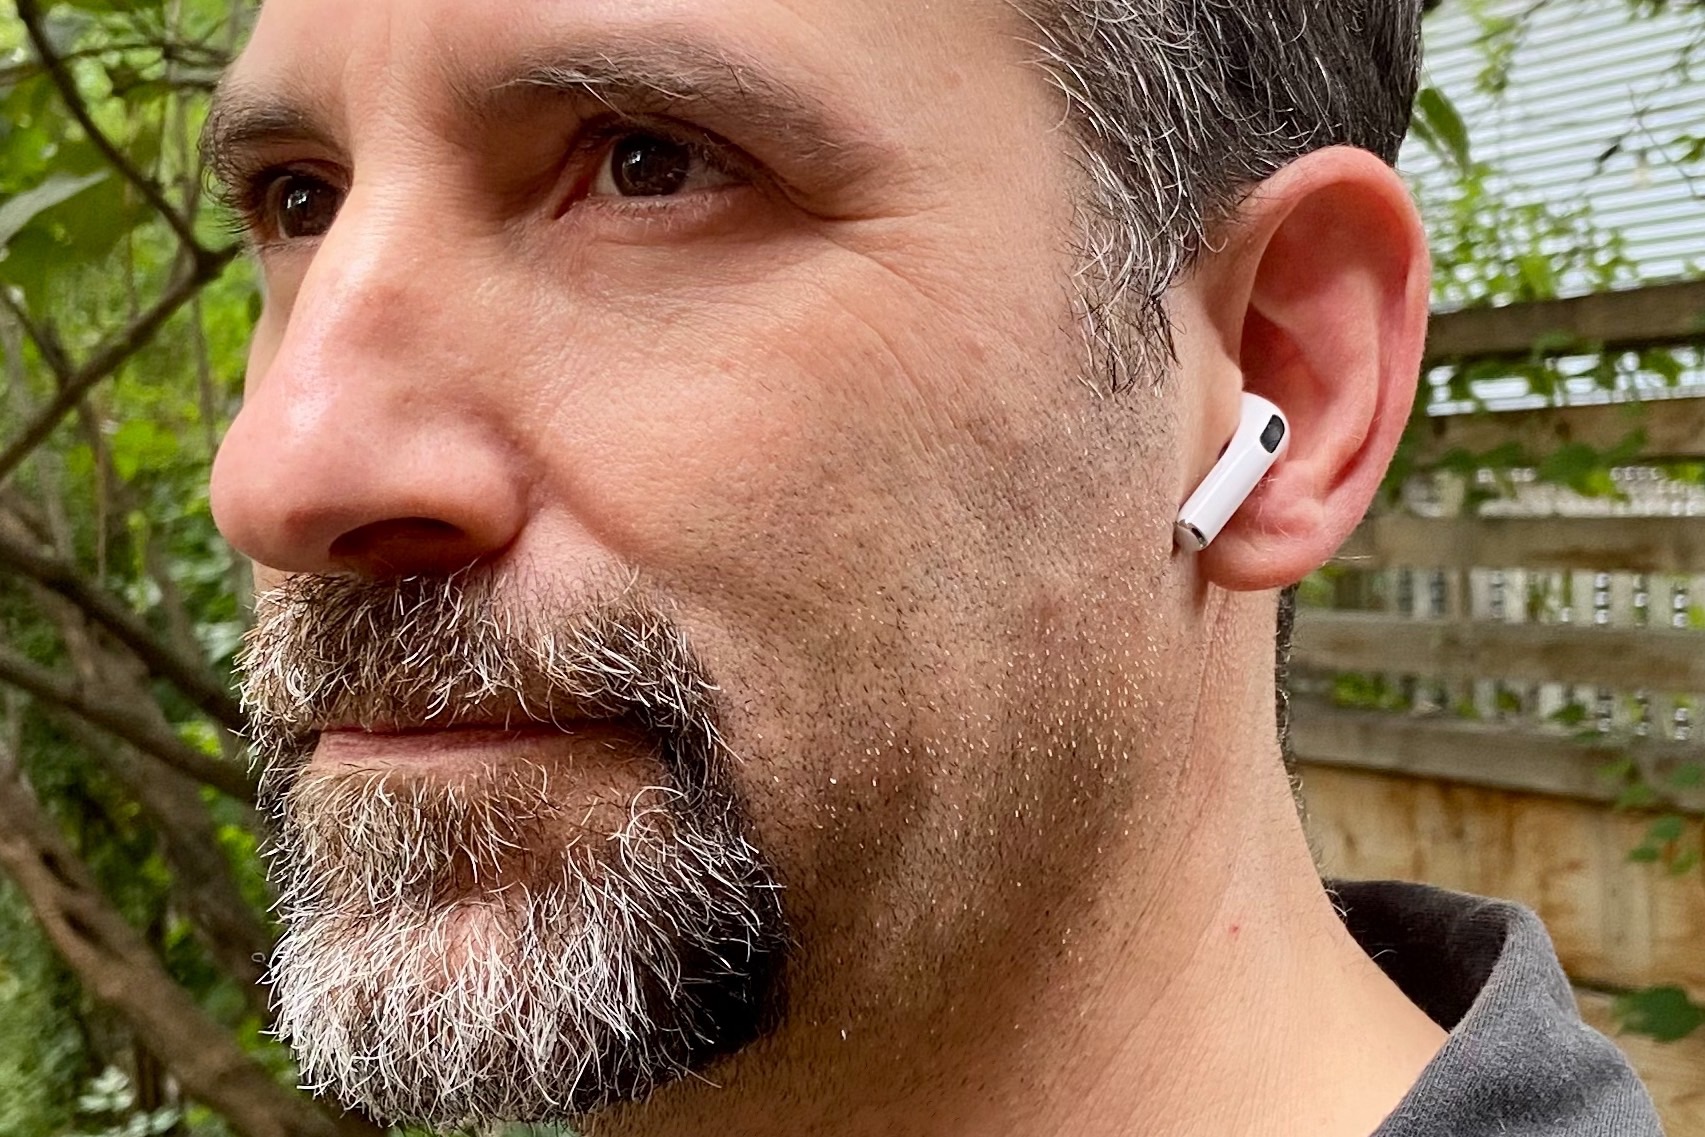 Apple AirPods 3 review: Spatial audio steals the show - PhoneArena